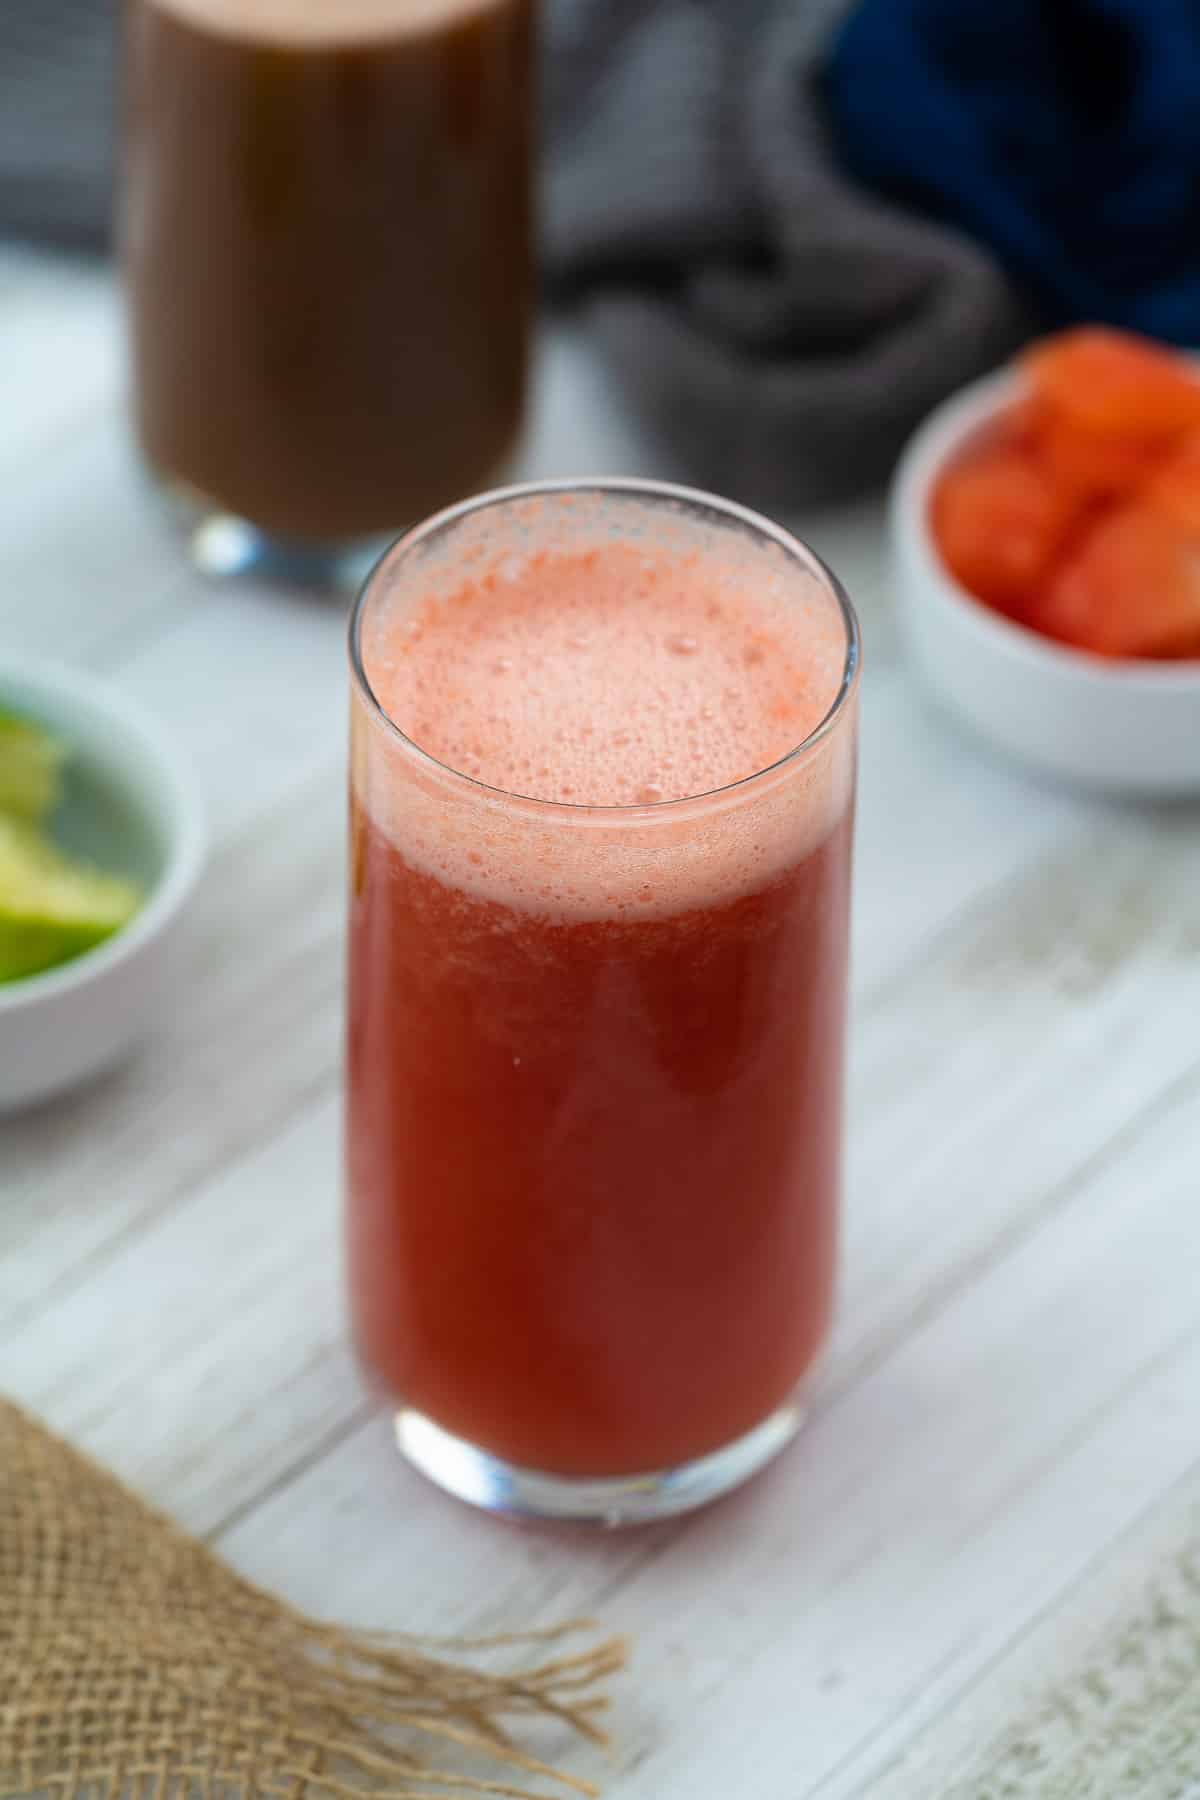 Fresh watermelon juice served in glass with watermelon and lemon nearby.